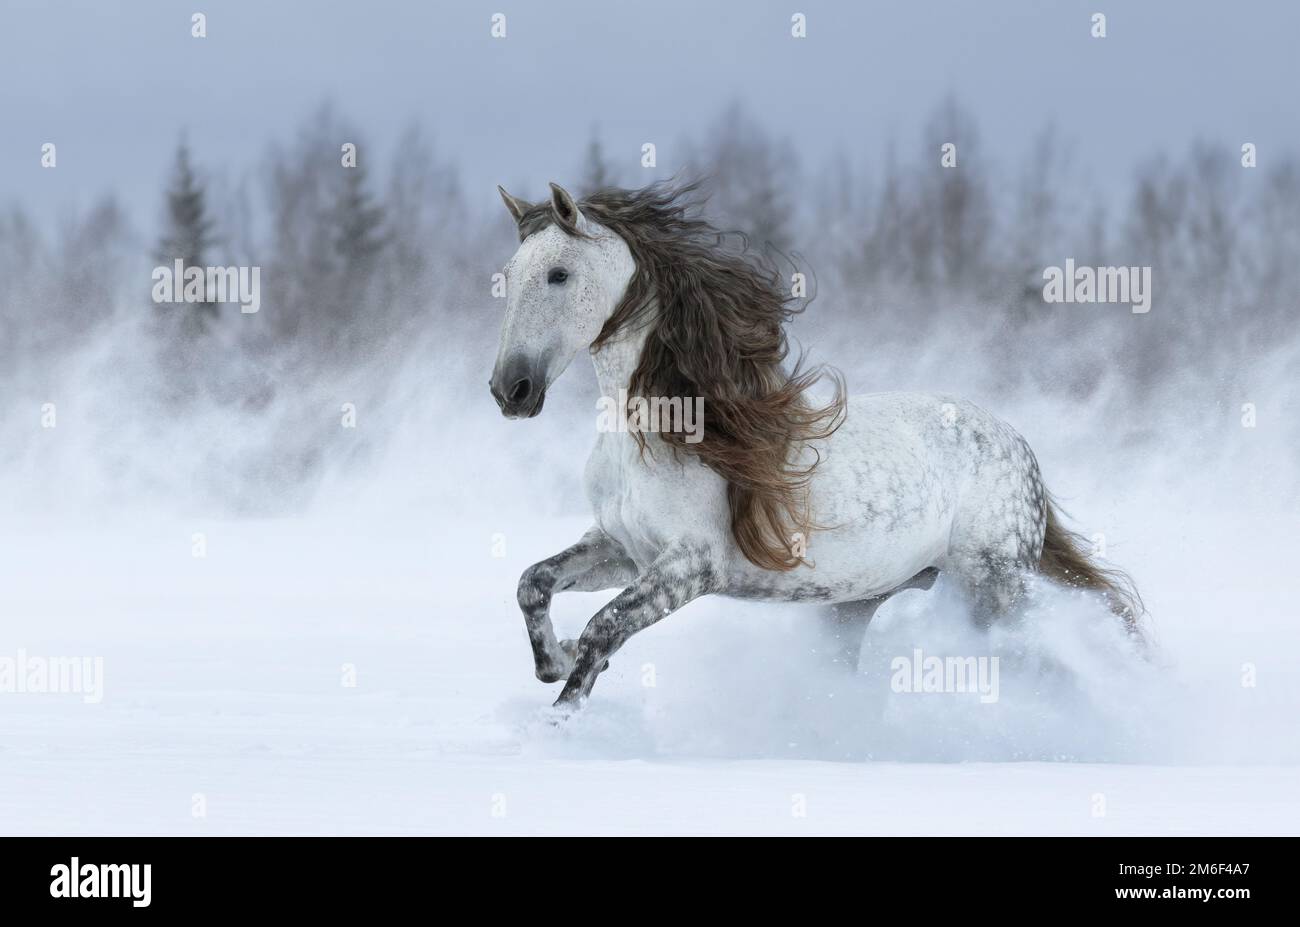 Grey long-maned Purebred Spanish horse galloping during blizzard across winter meadow. Stock Photo